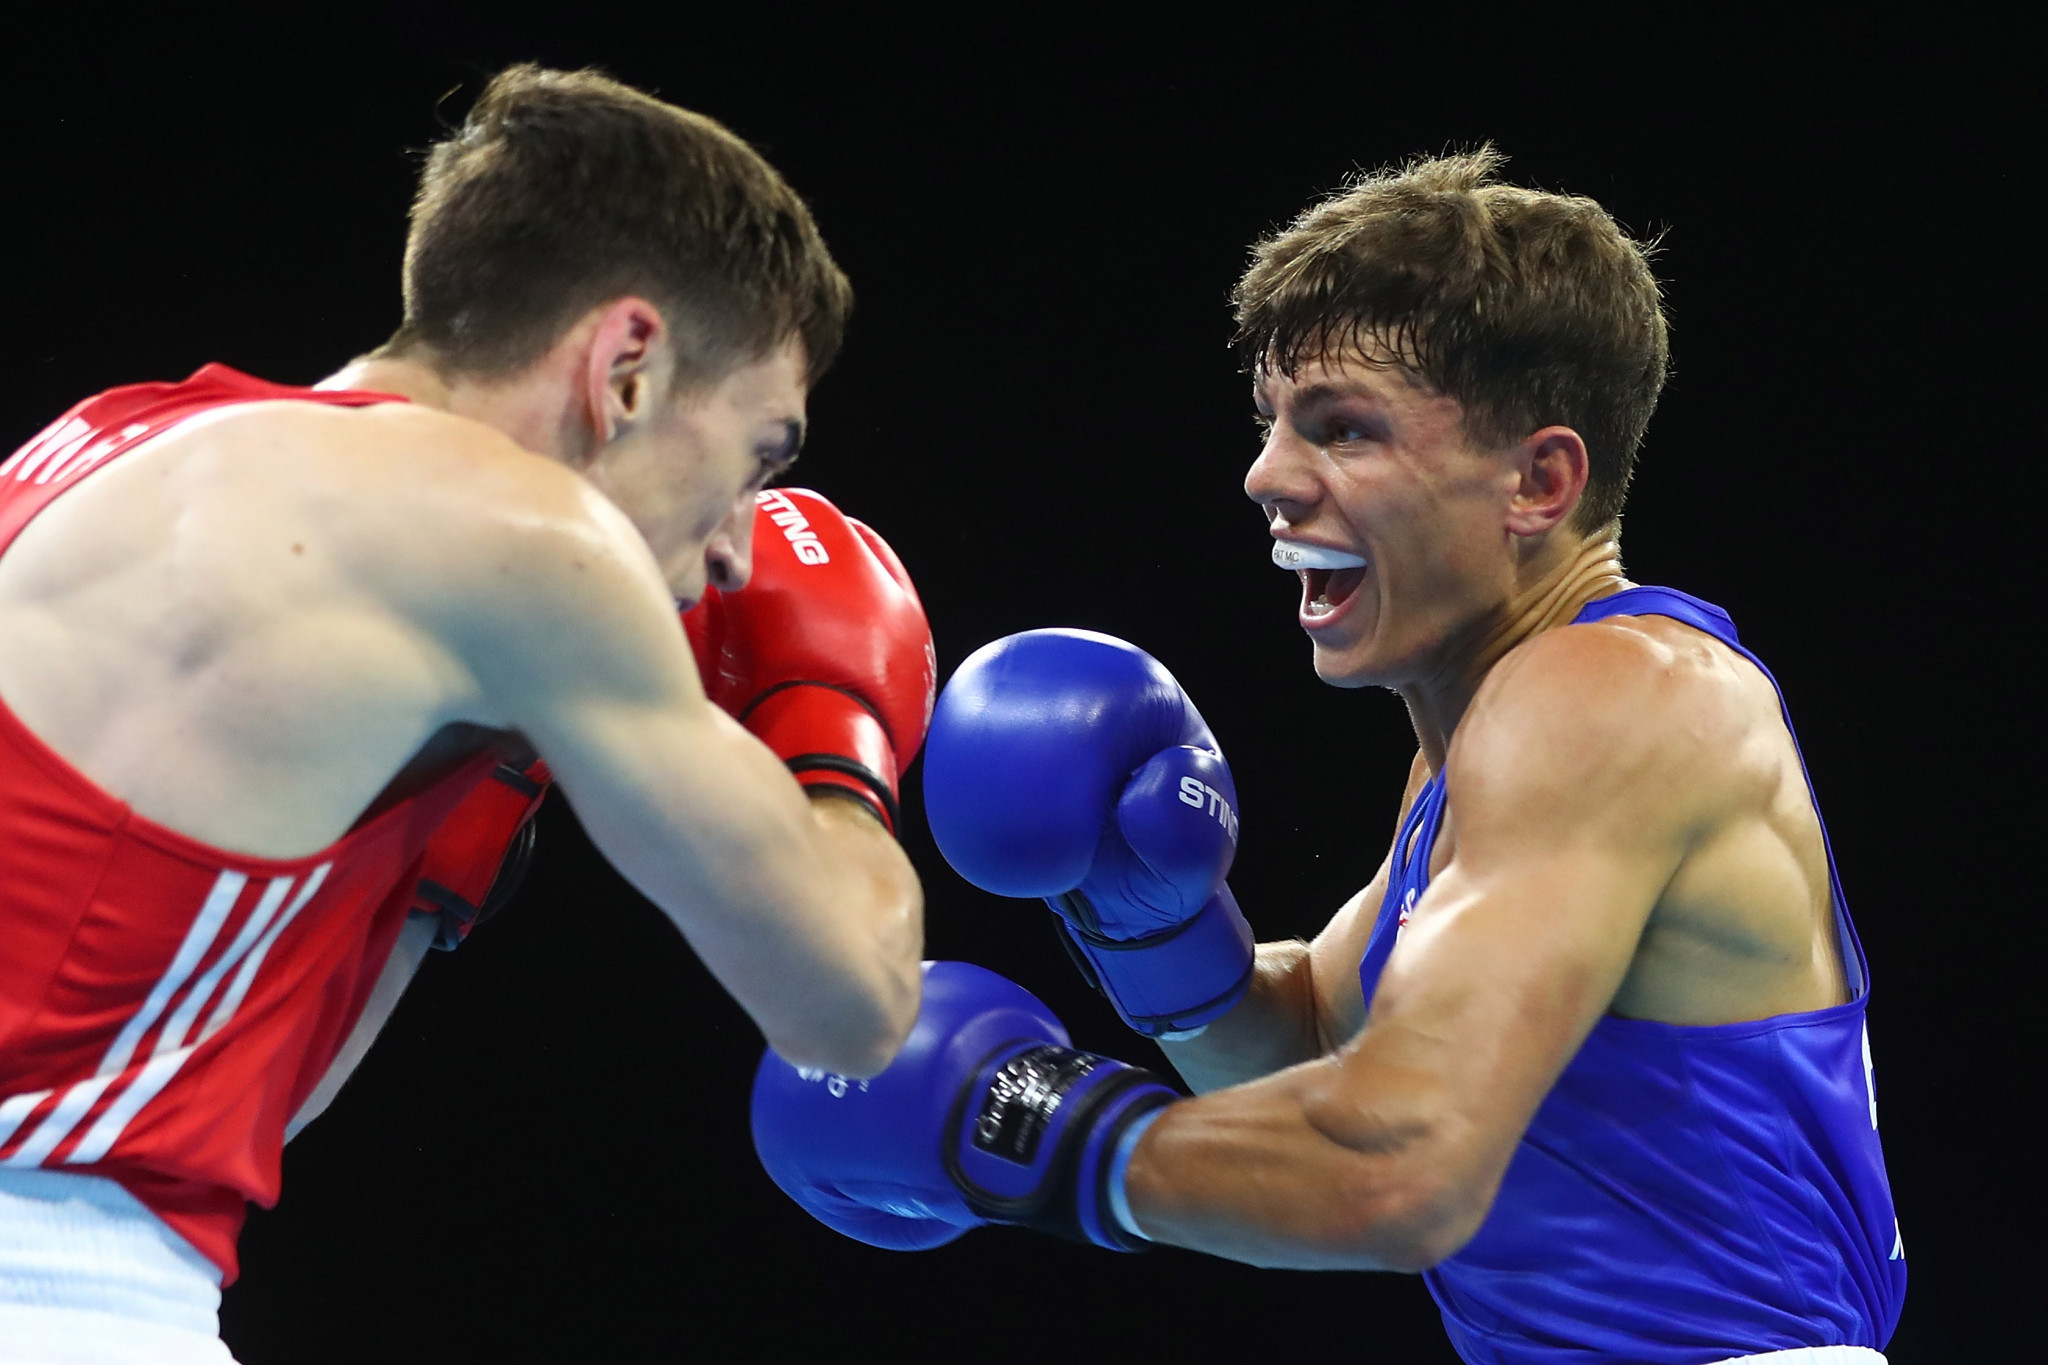 McCormack brothers earn half of England's four golds at European Union Boxing Championships 